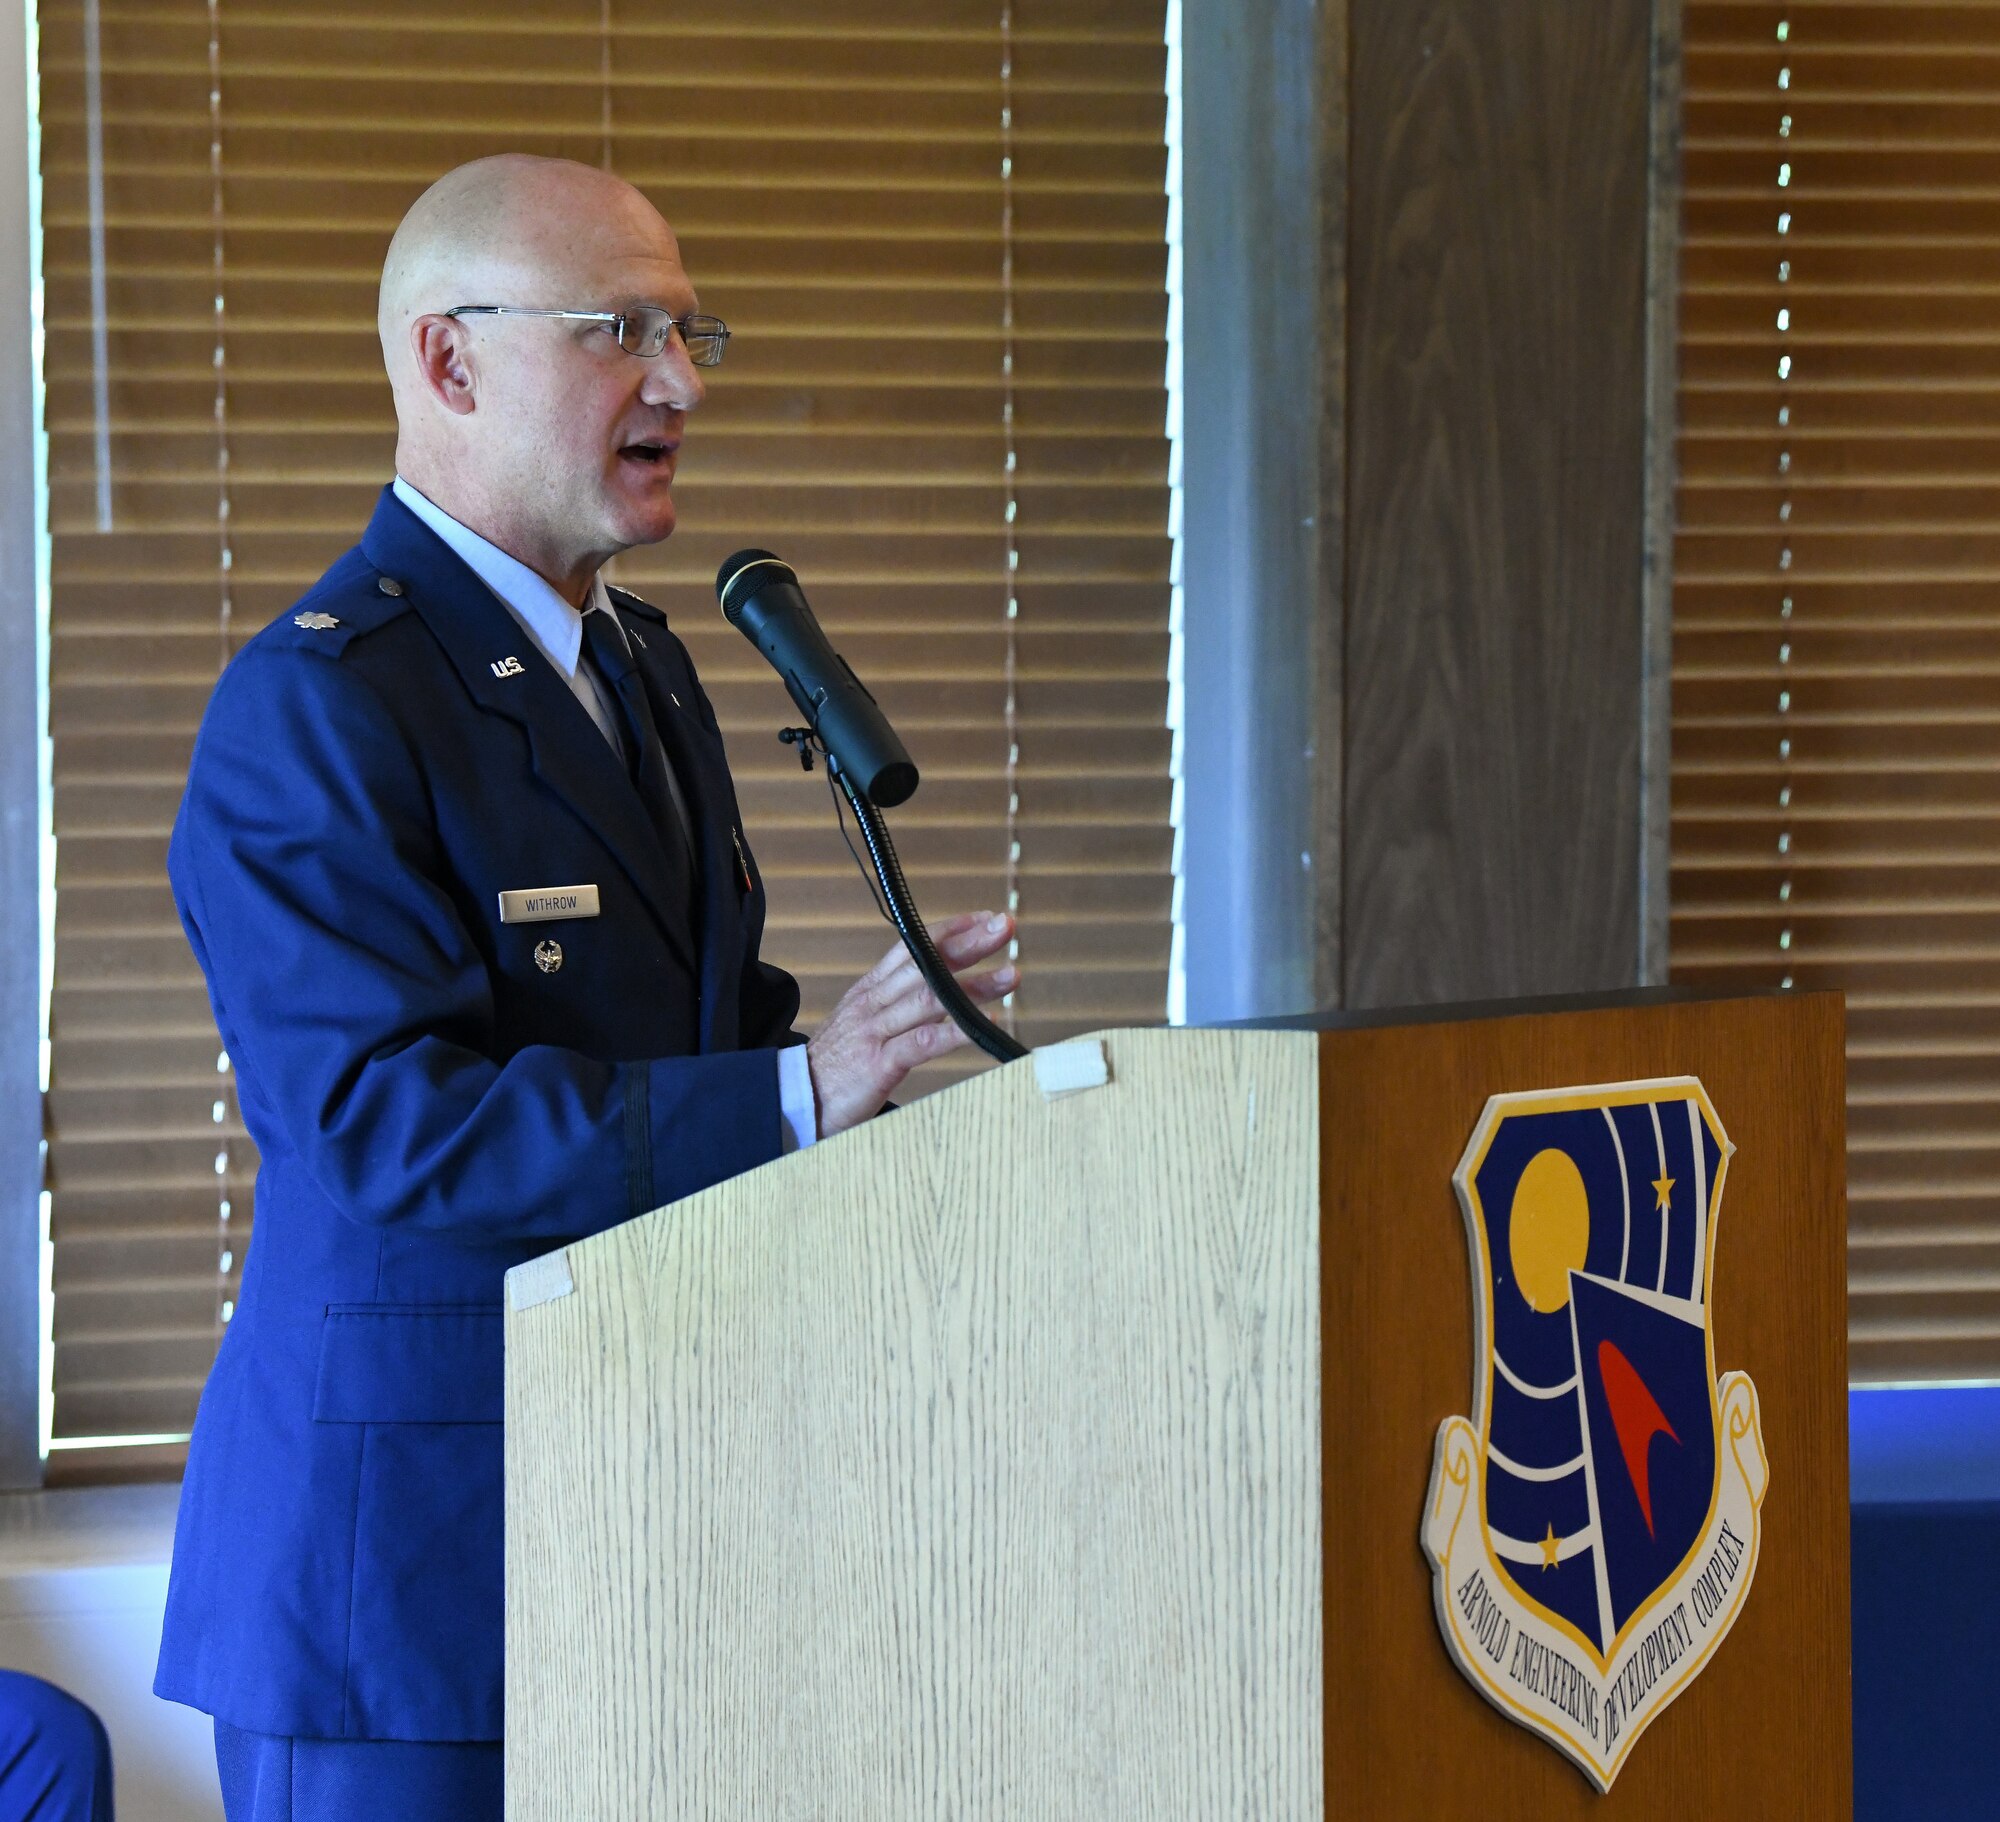 Lt. Col. Eric Withrow, chief of the Test Support Division, speaks after assuming leadership of the division during a change of leadership ceremony at Arnold Air Force Base, Tenn., June 2, 2023. (U.S. Air Force photo by Jill Pickett)